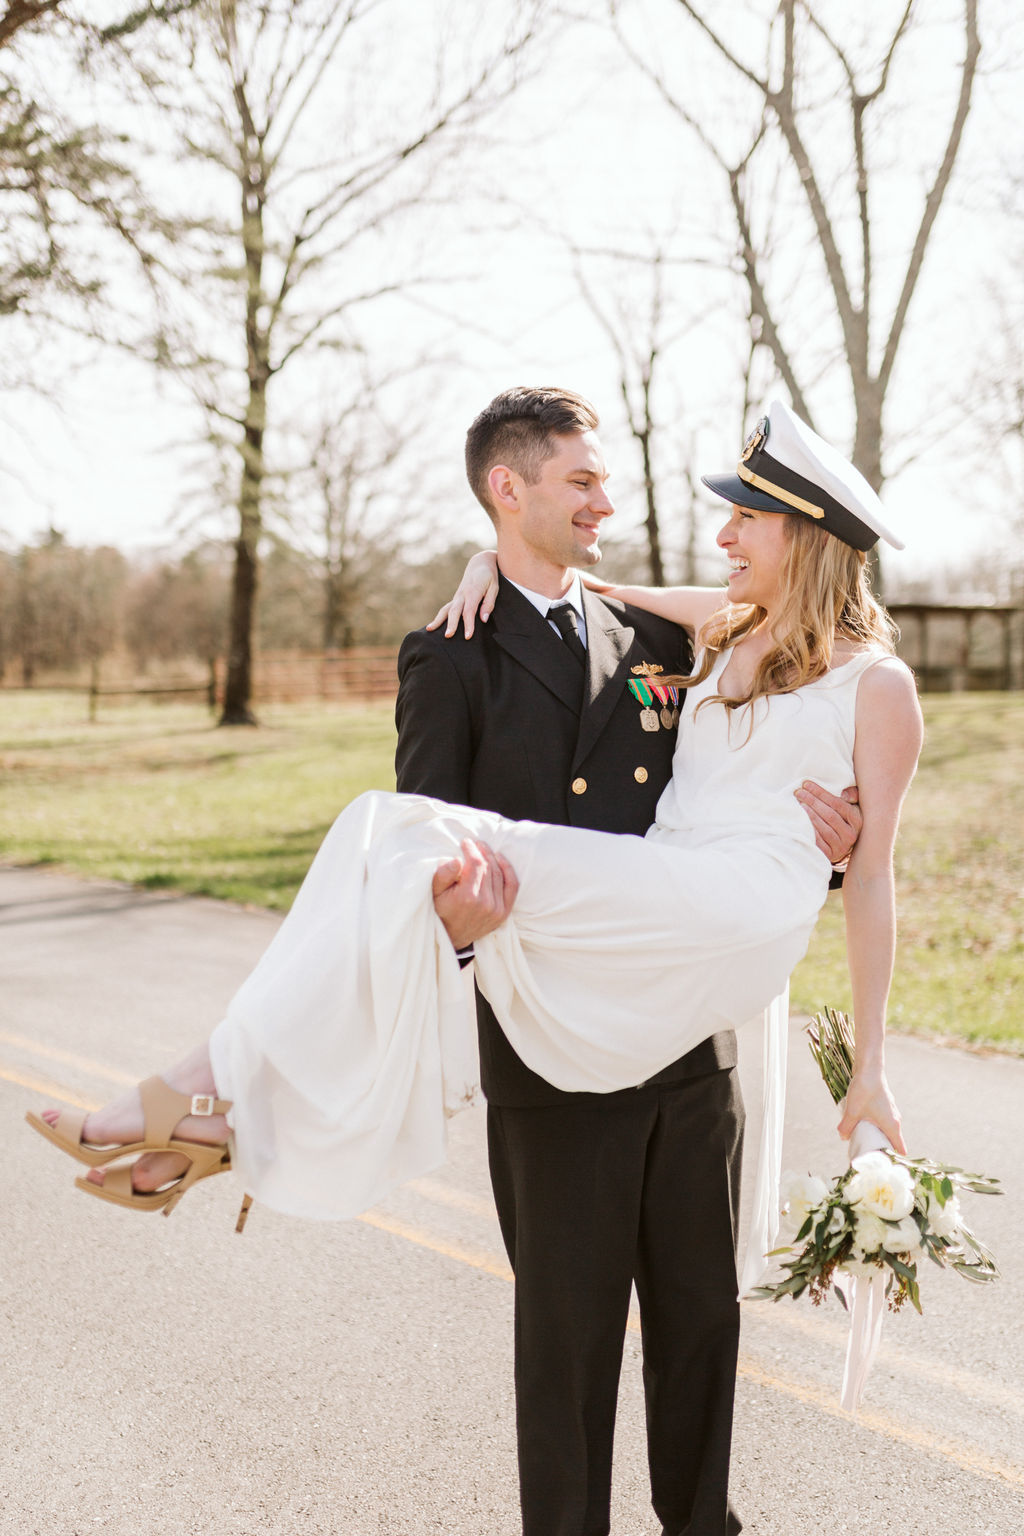 Groom in military dress uniform holds his bride in his arms. She wears his military cap and holds a bouquet at her side.